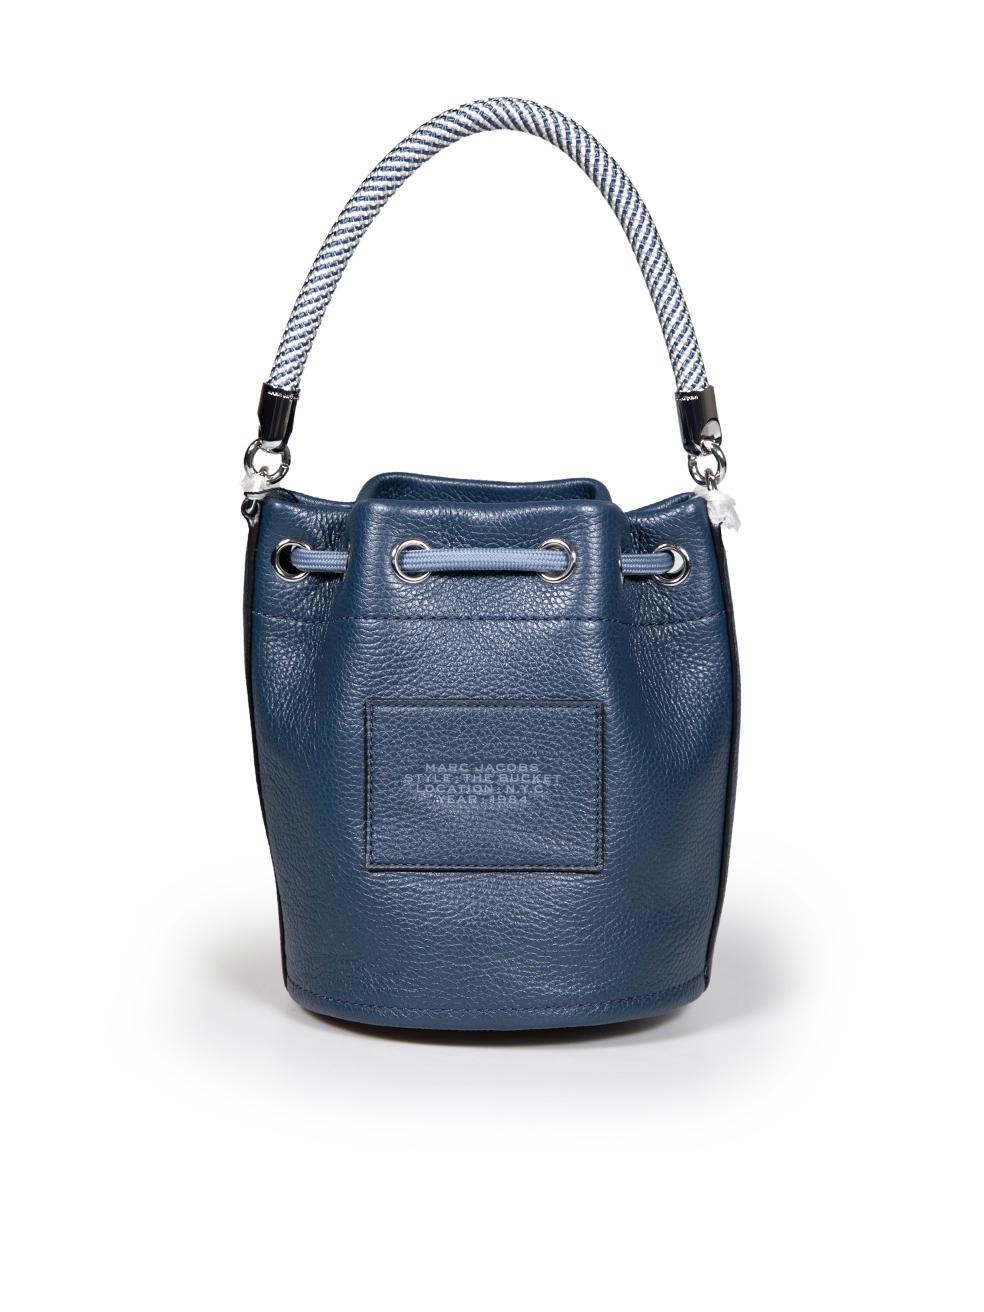 Marc Jacobs Blue Leather 'The Bucket' Bag In New Condition For Sale In London, GB